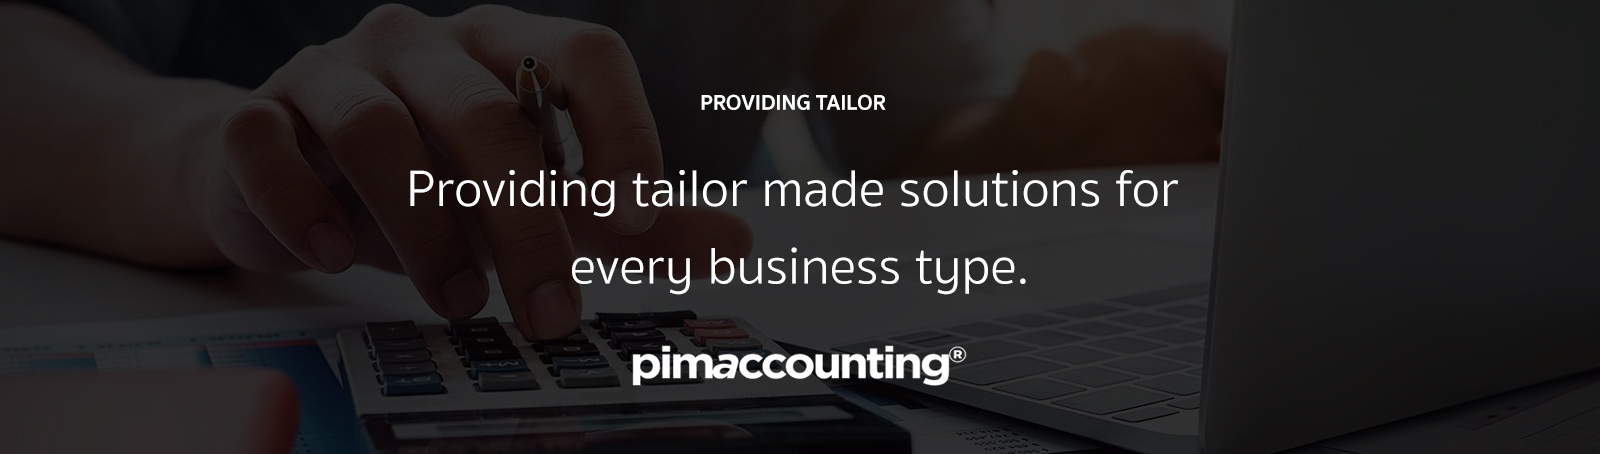 Providing tailor made solutions